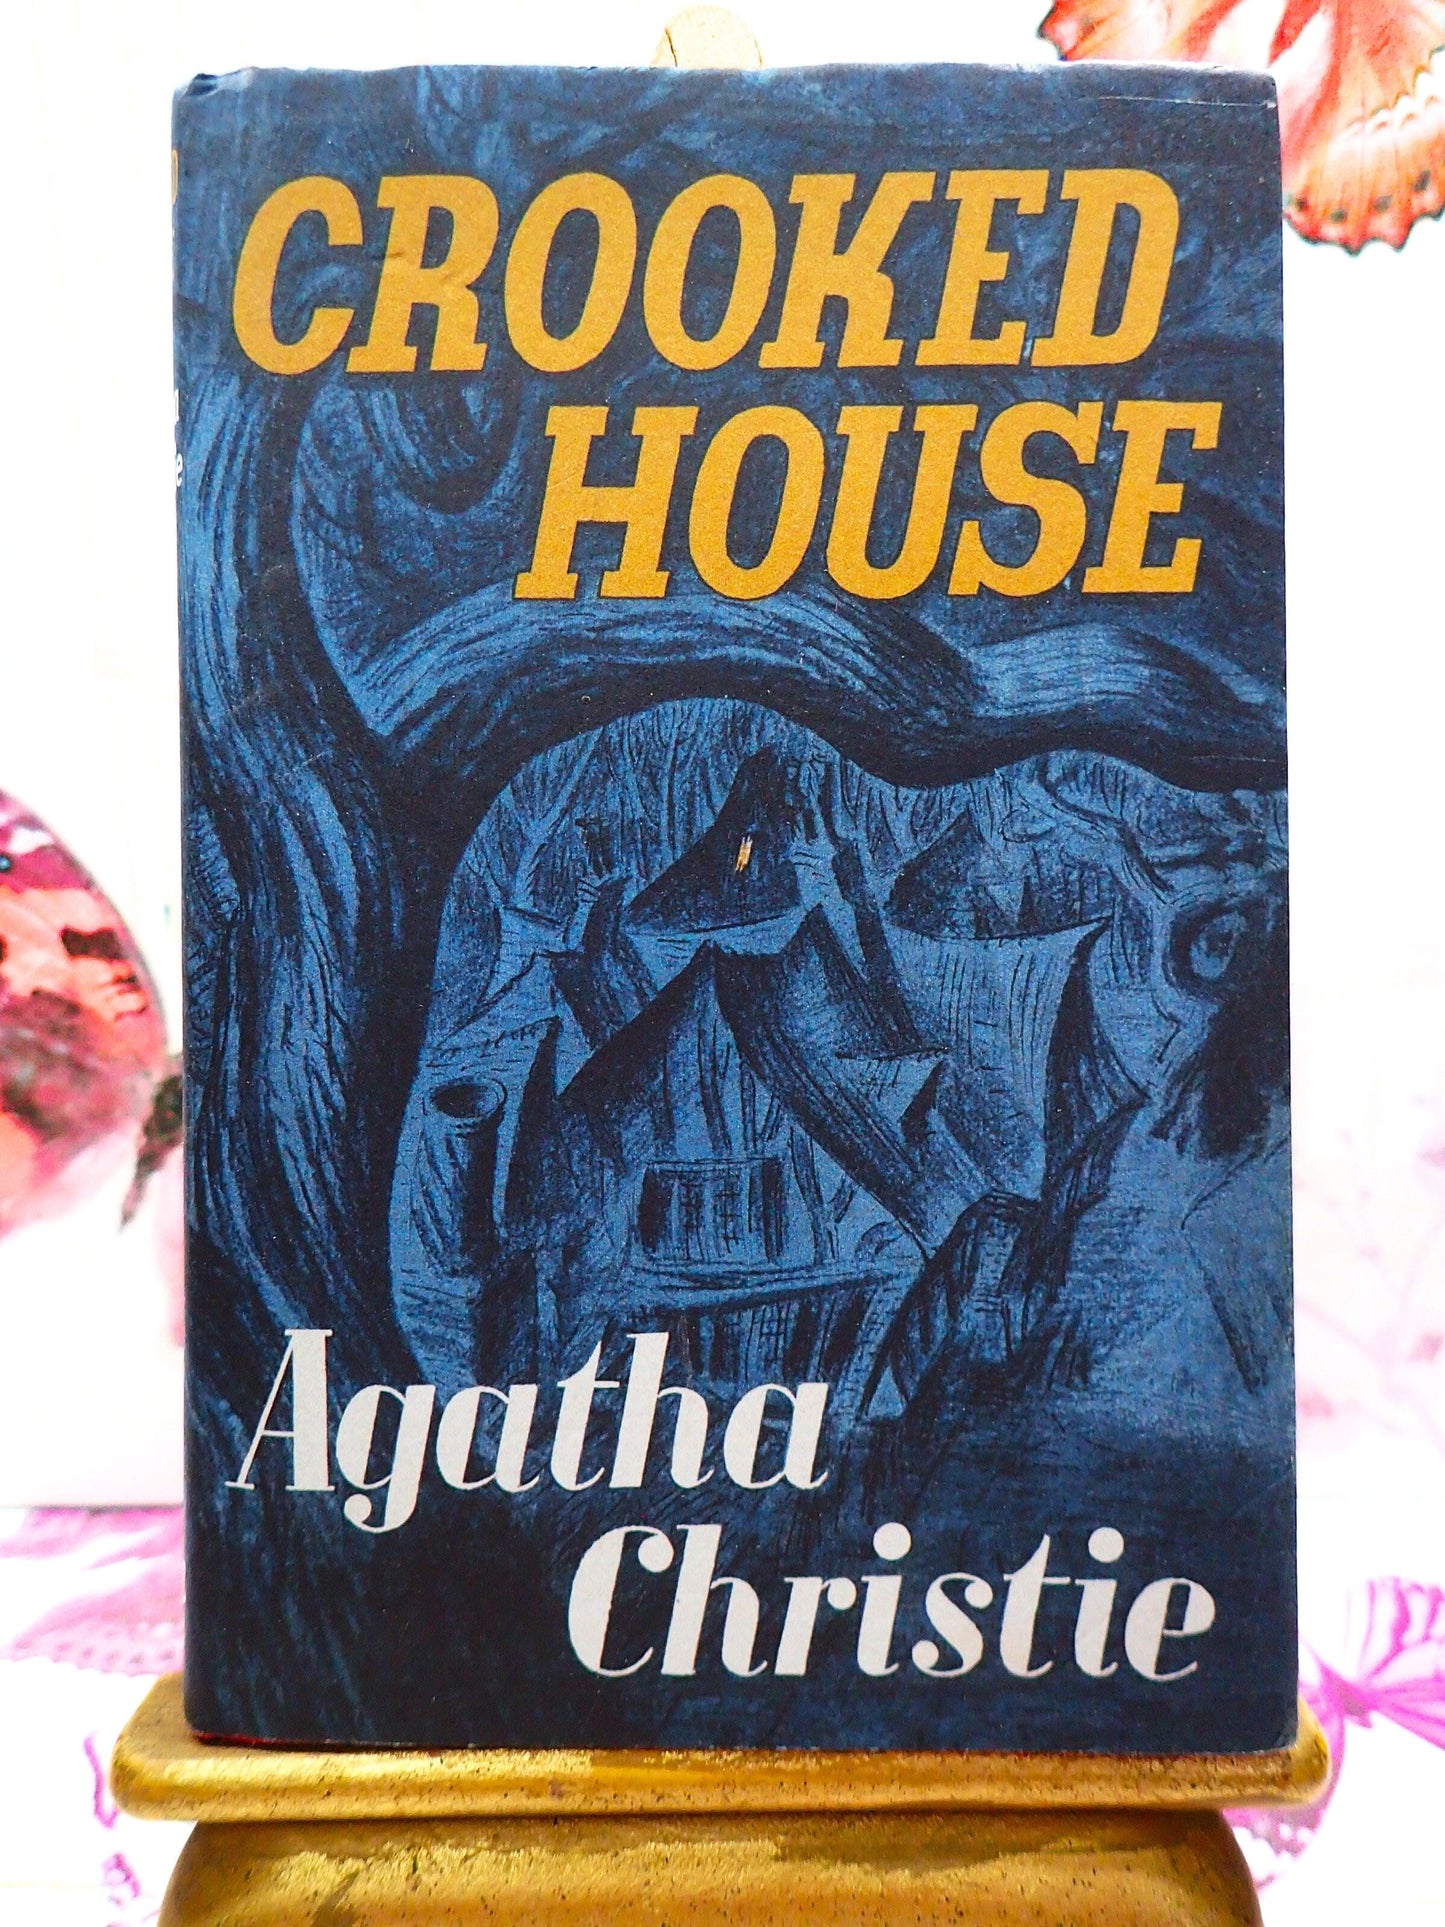 Front Cover of The Crooked House by Agatha Christie showing Creepy House in the woods